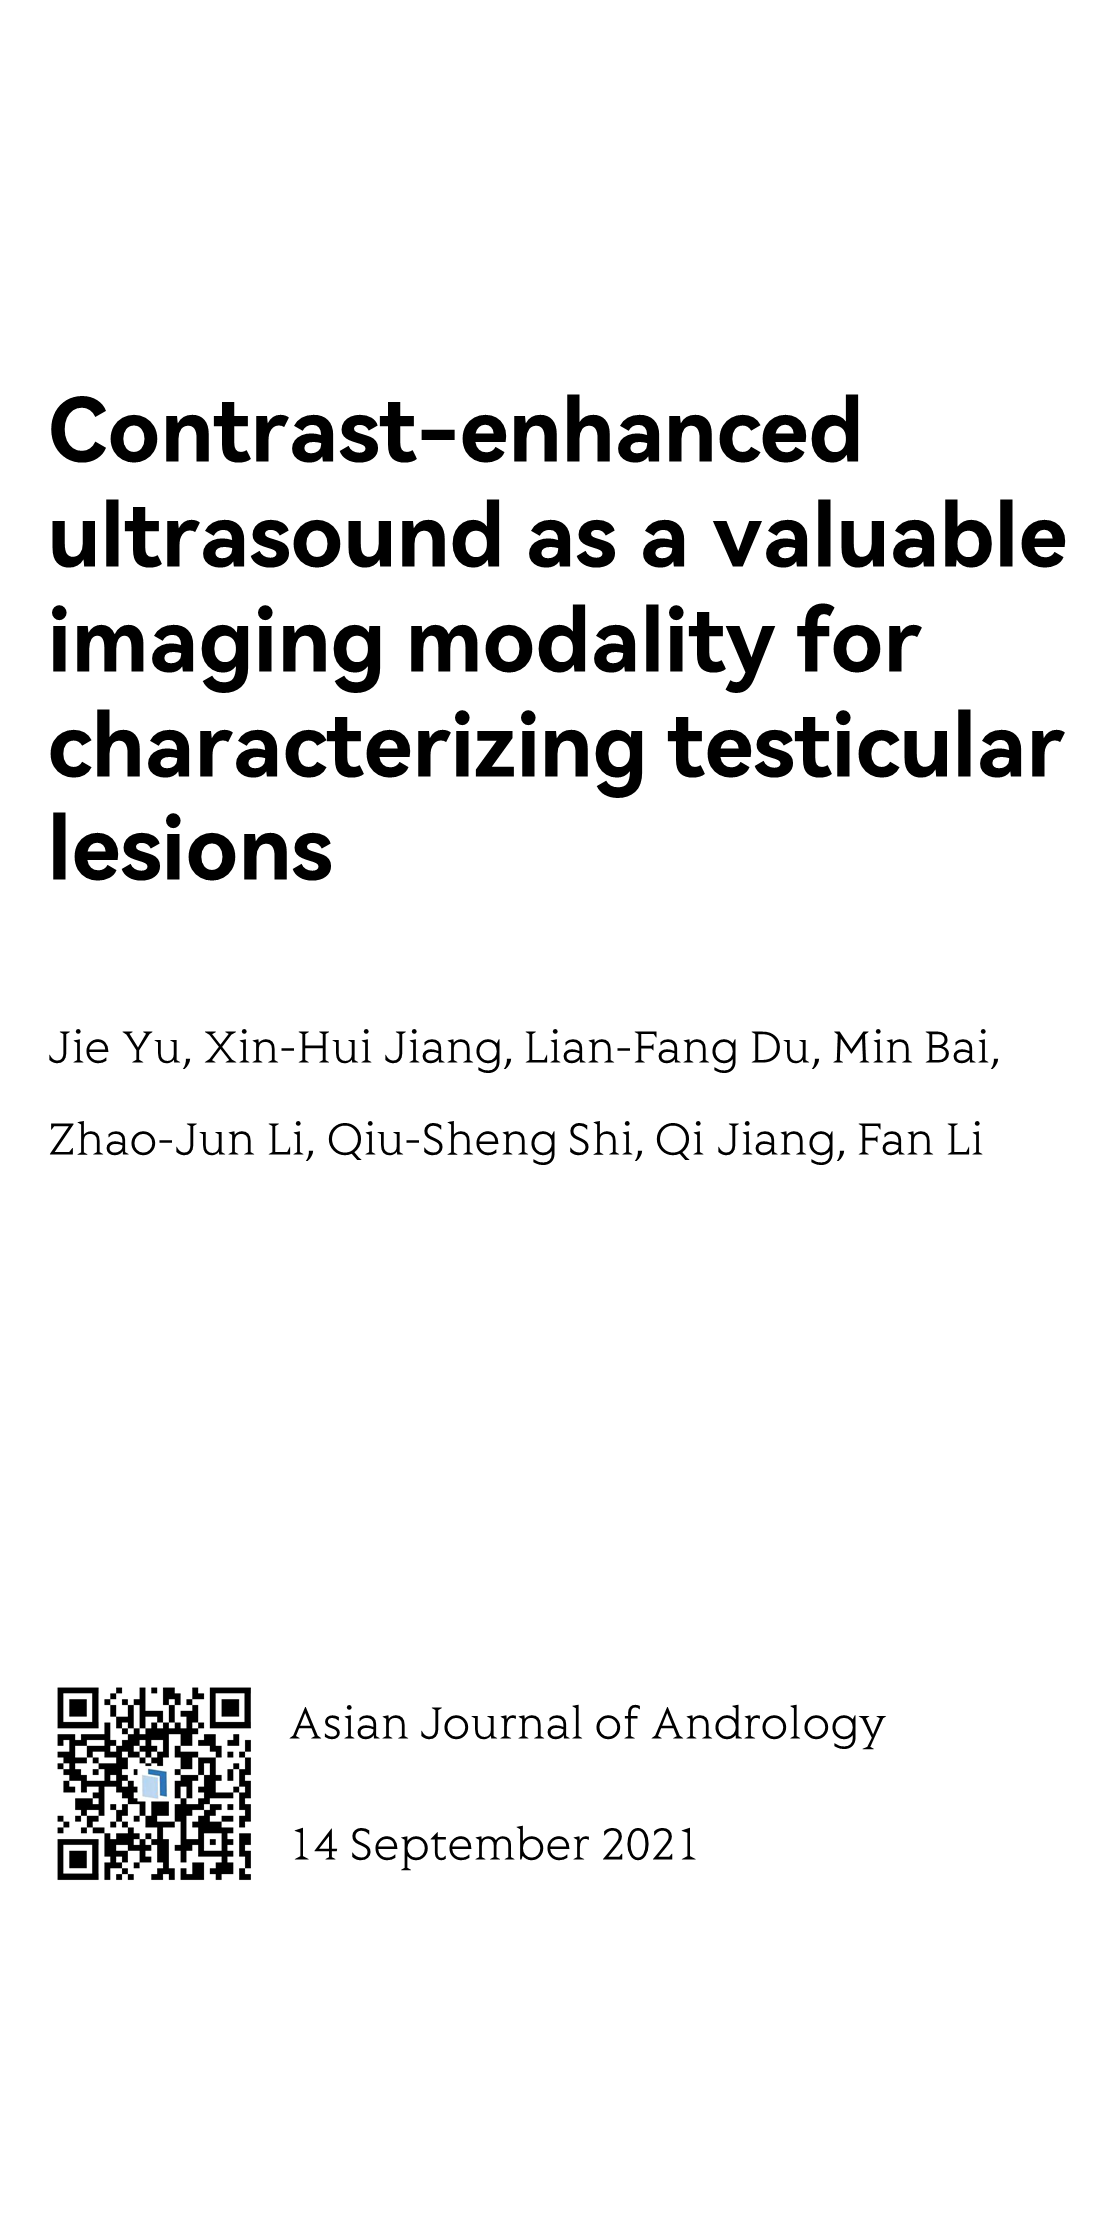 Contrast-enhanced ultrasound as a valuable imaging modality for characterizing testicular lesions_1